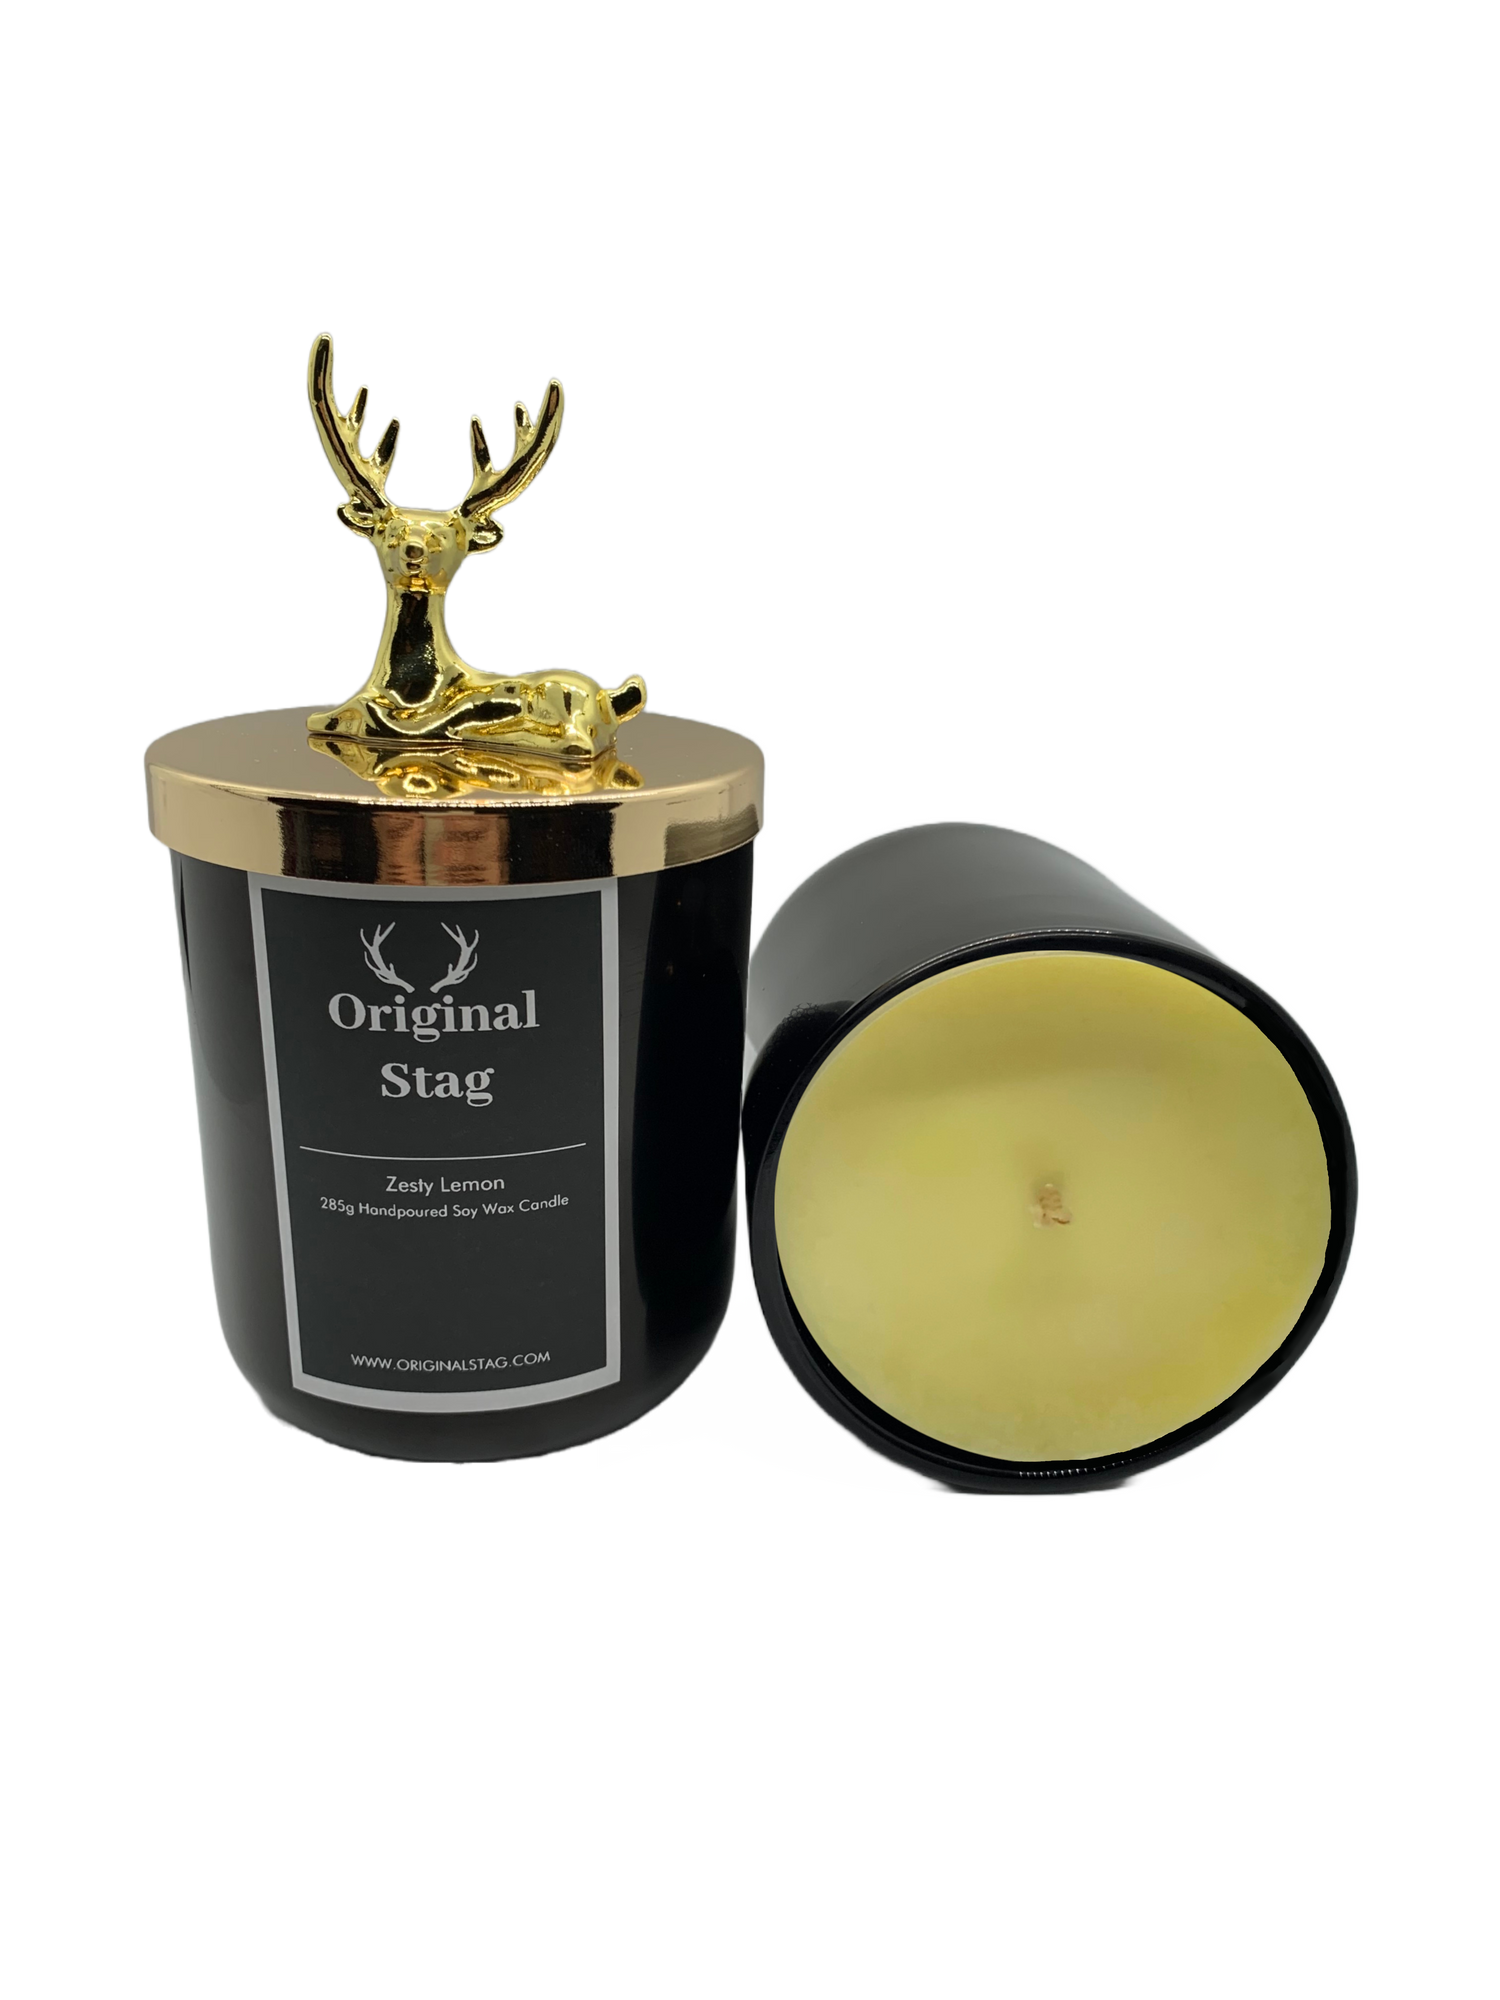 Zesty Lemon scented candle in a glass jar with a light yellow wax and a burning wick, emitting a fresh and tangy aroma